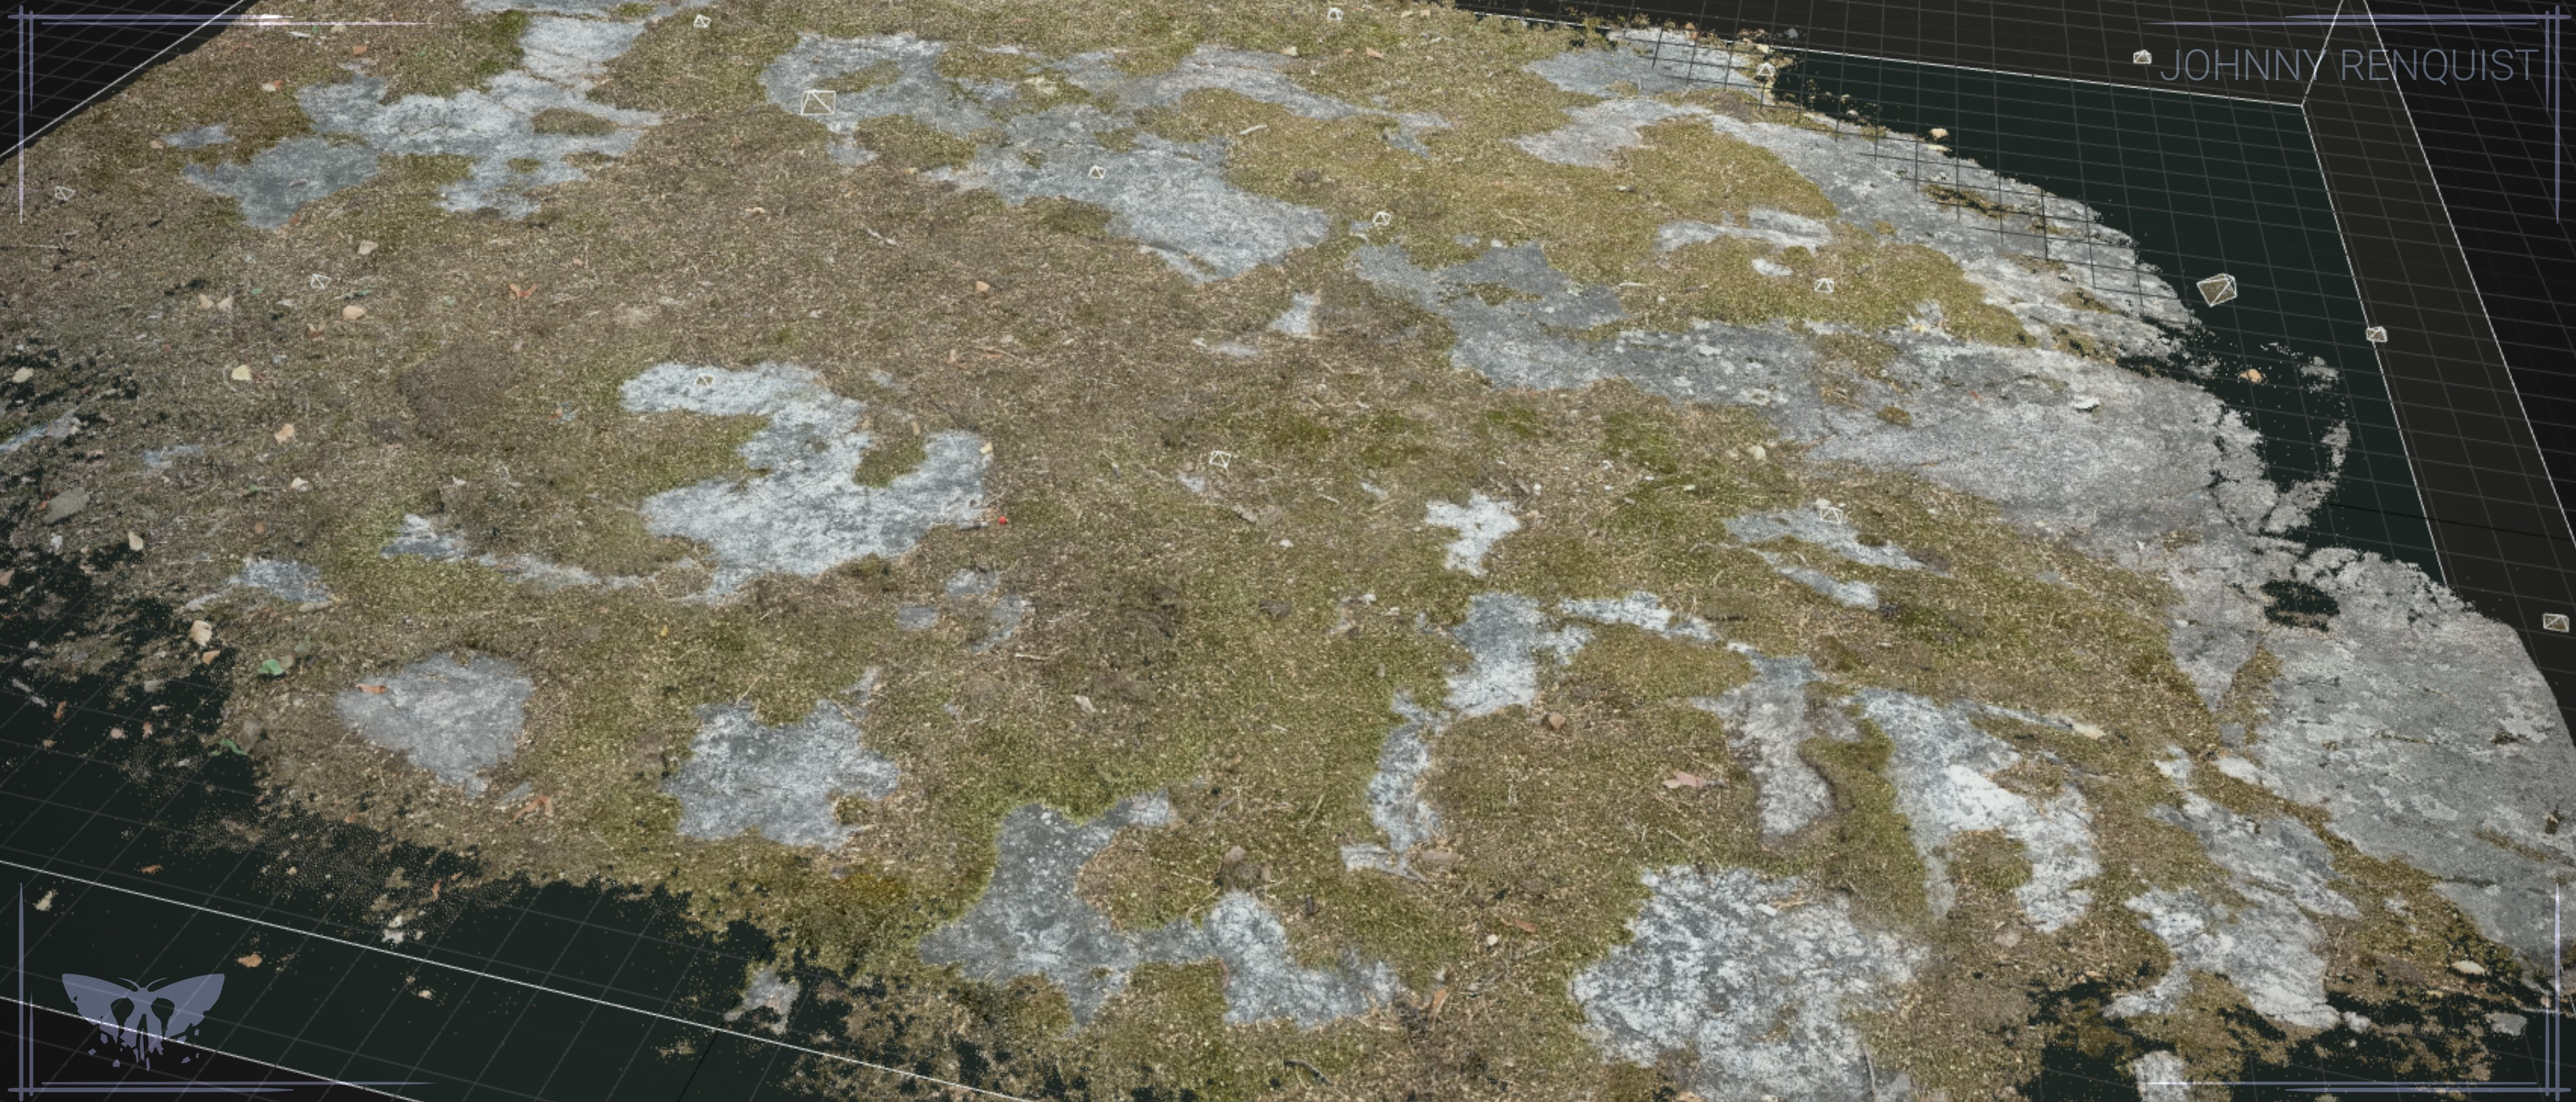 Photogrammetry data used in RealityCapture for the terrain materials. Later turning them into tileable textures in ZBrush.